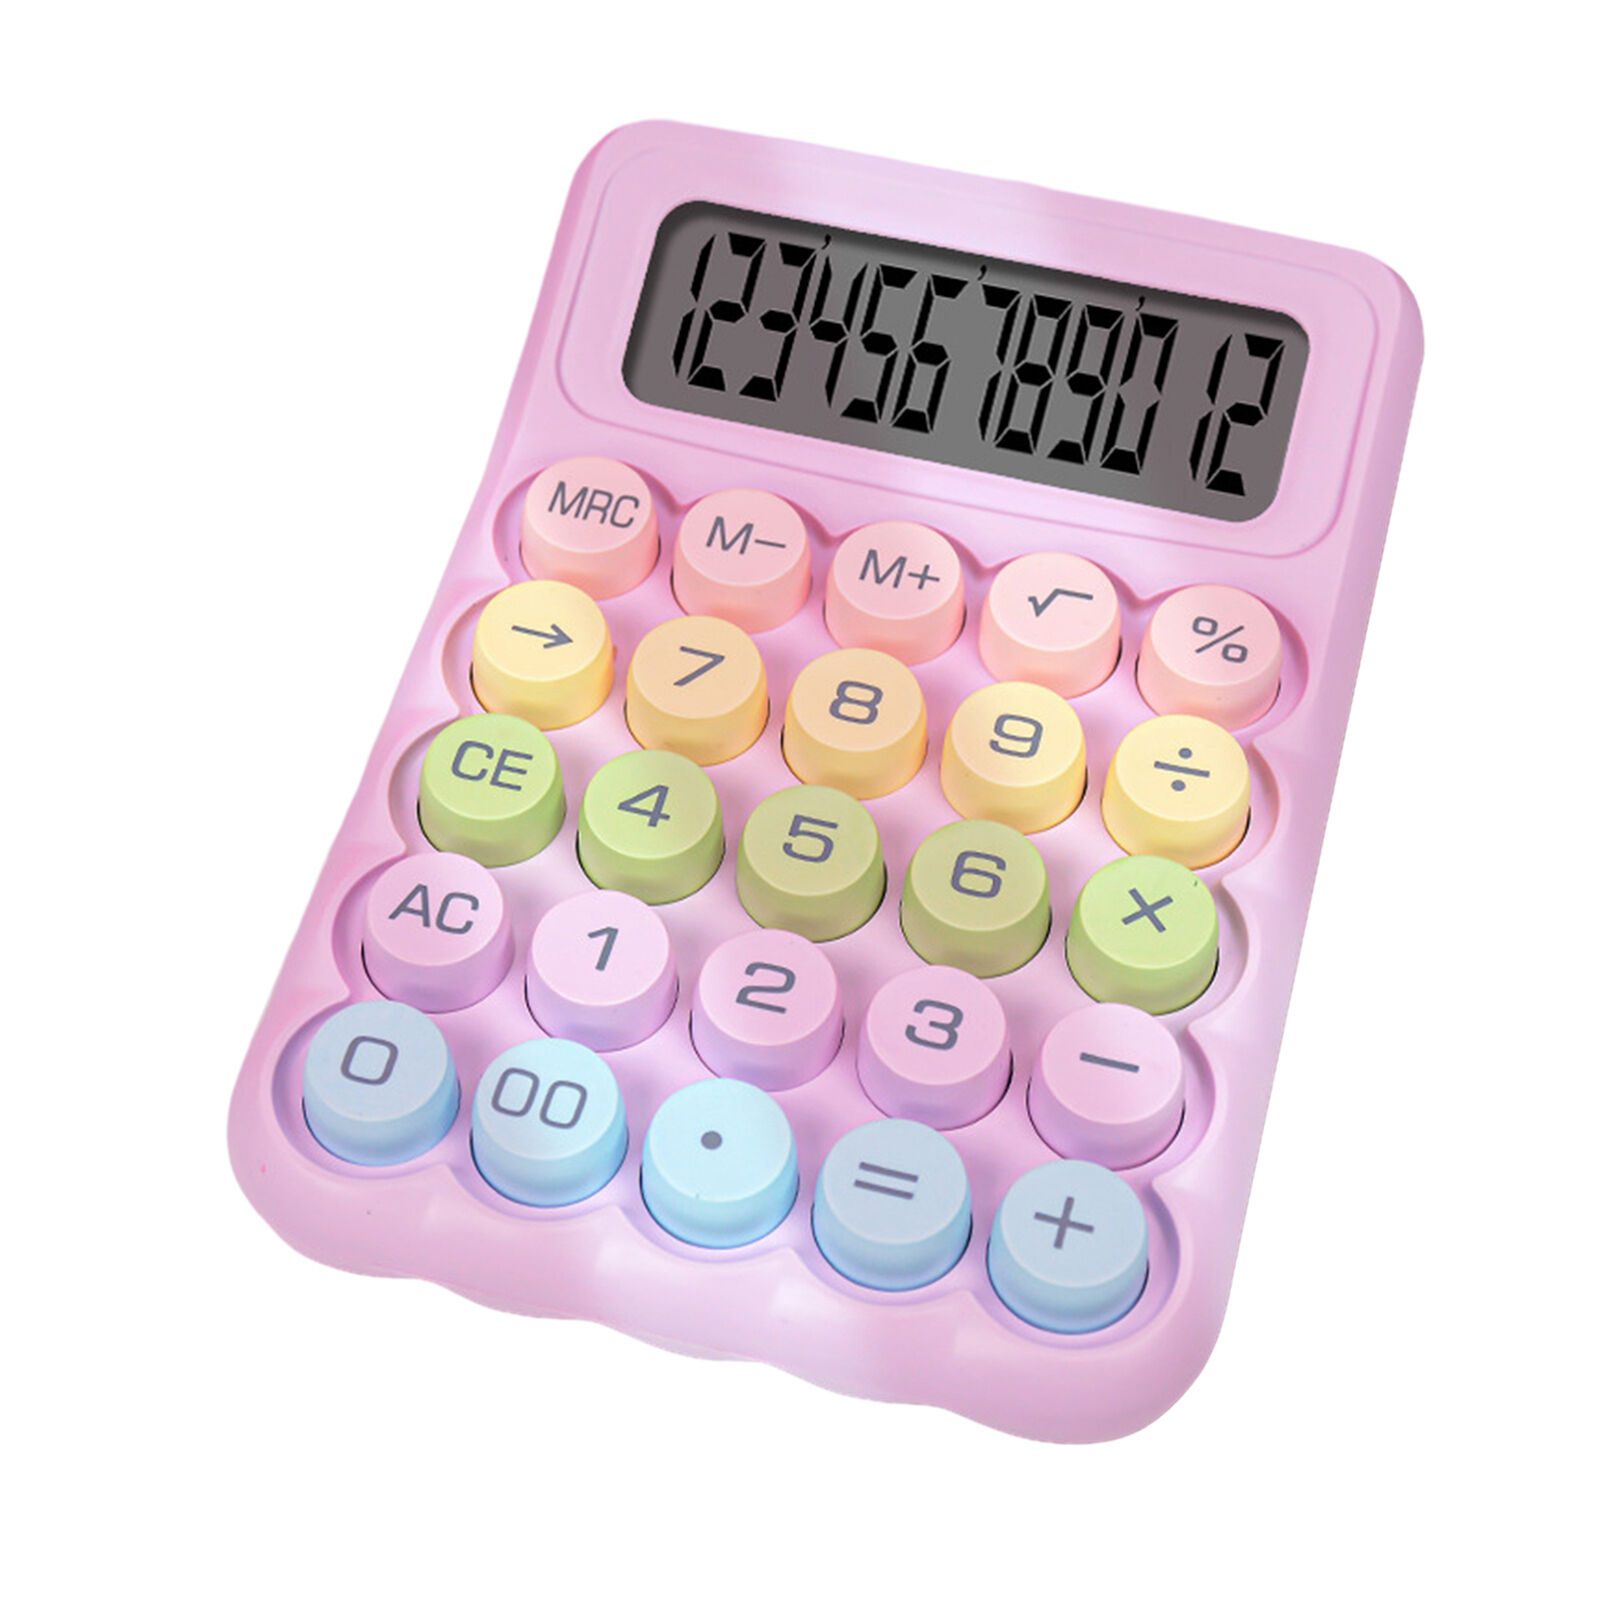 Vintage Design Calculator Extra Retro Round Key Mechanical with Lcd Display